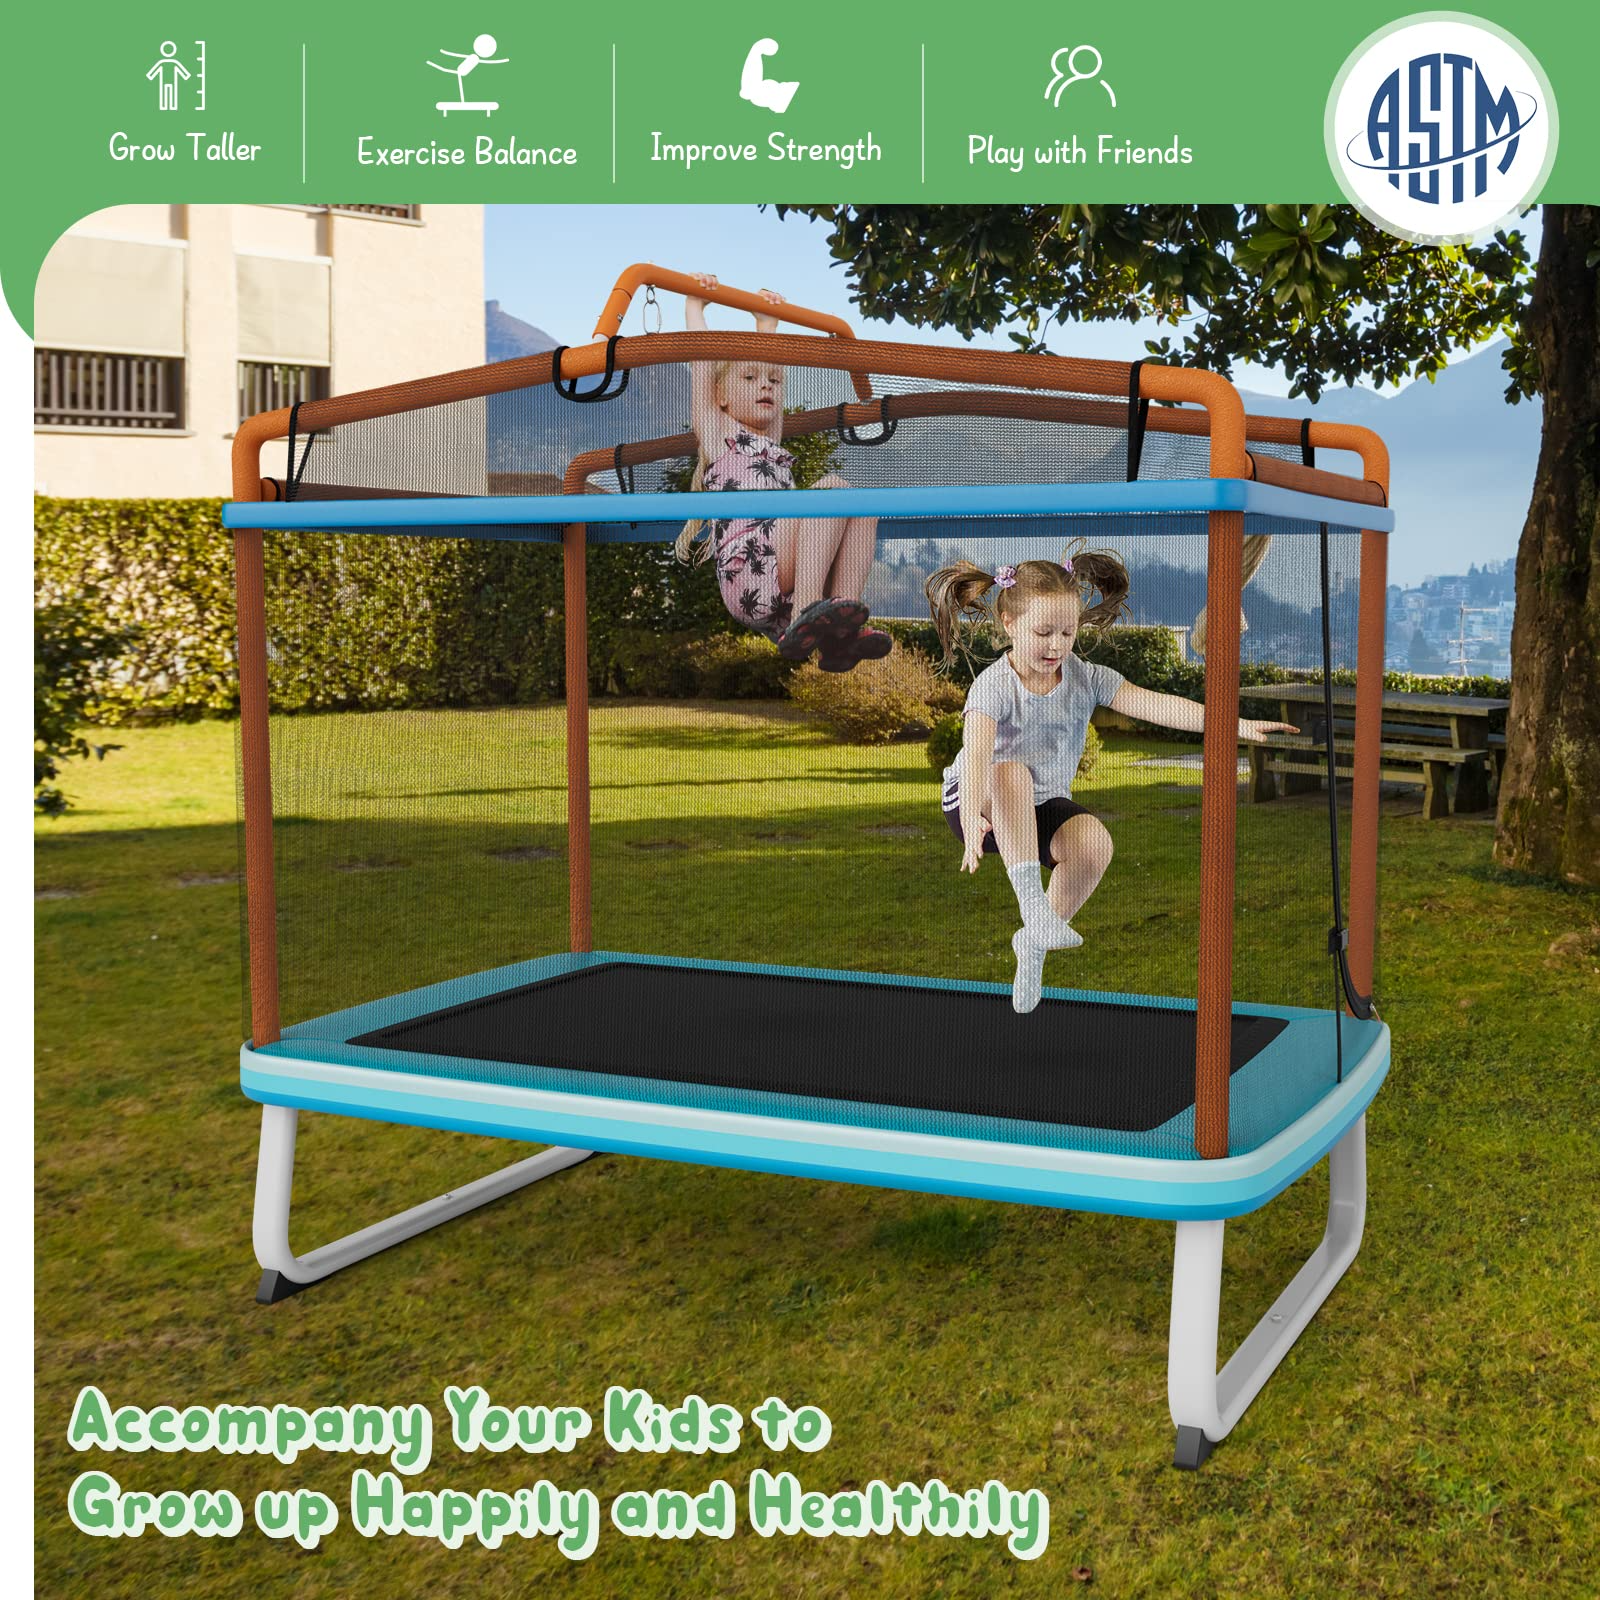 Giantex 6Ft Kids Trampoline with Swing and Horizontal Bar